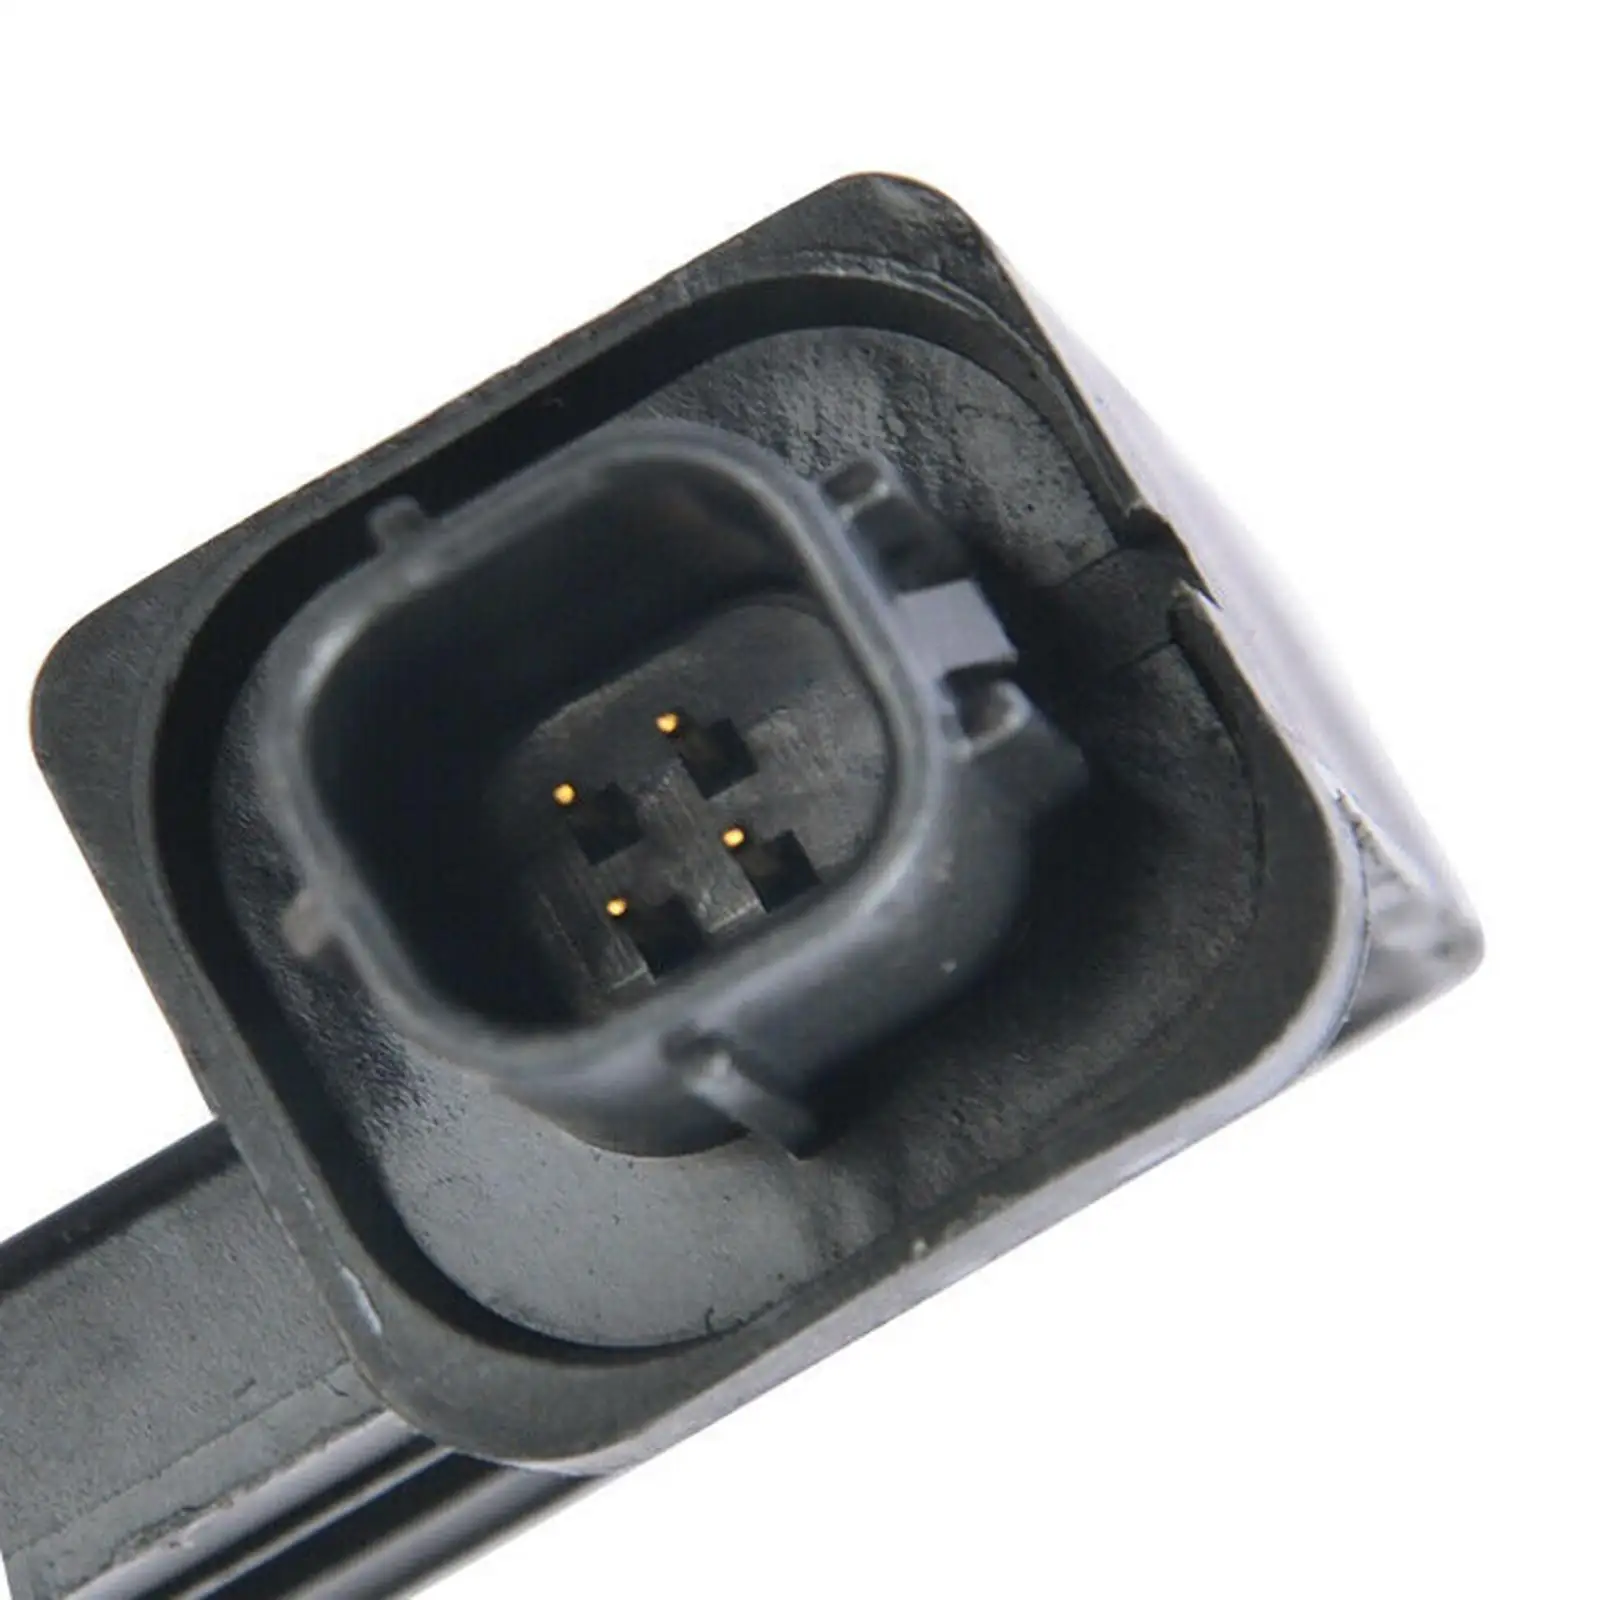 Battery Current Sensor Fit for  2014-2019 Replacement Parts